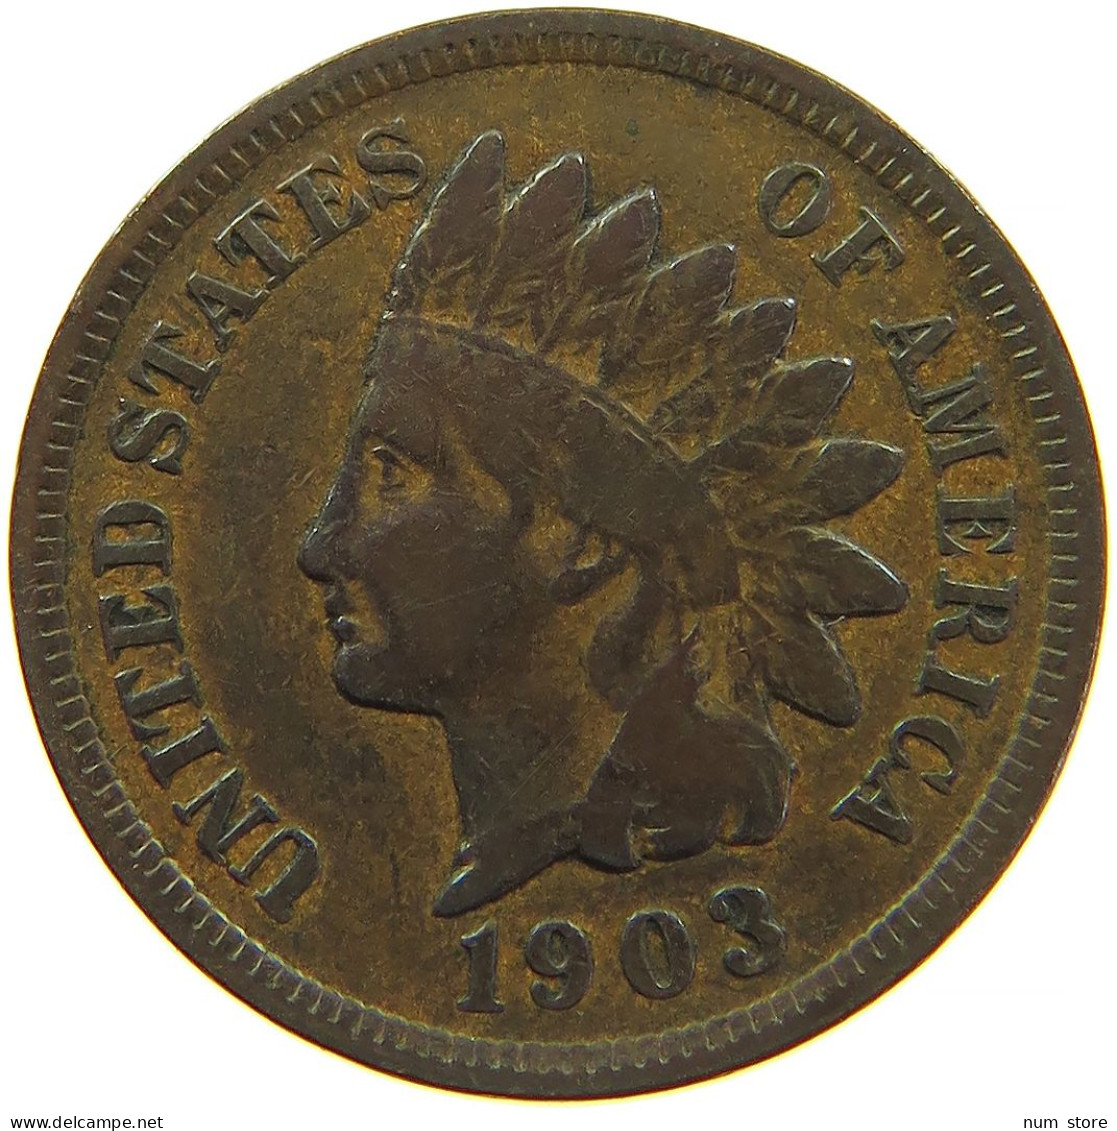 UNITED STATES OF AMERICA CENT 1903 INDIAN HEAD #s091 0383 - 1859-1909: Indian Head